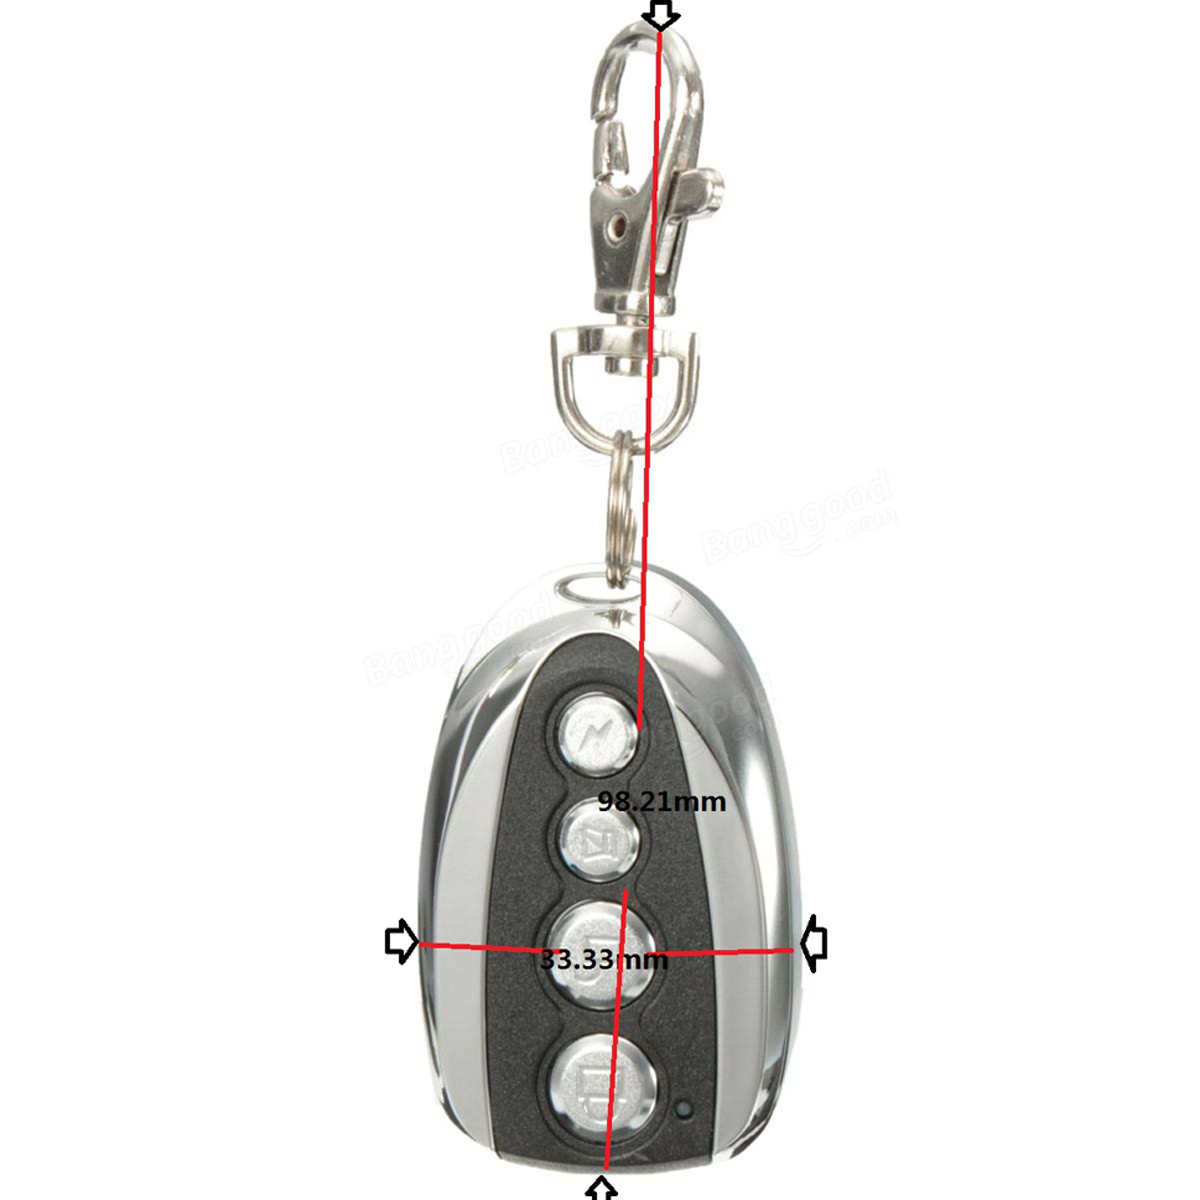 433MHZ-Remote-Control-Transmitter-Key-Chain-for-SL600AC-Slide-Gate-Operator-1268906